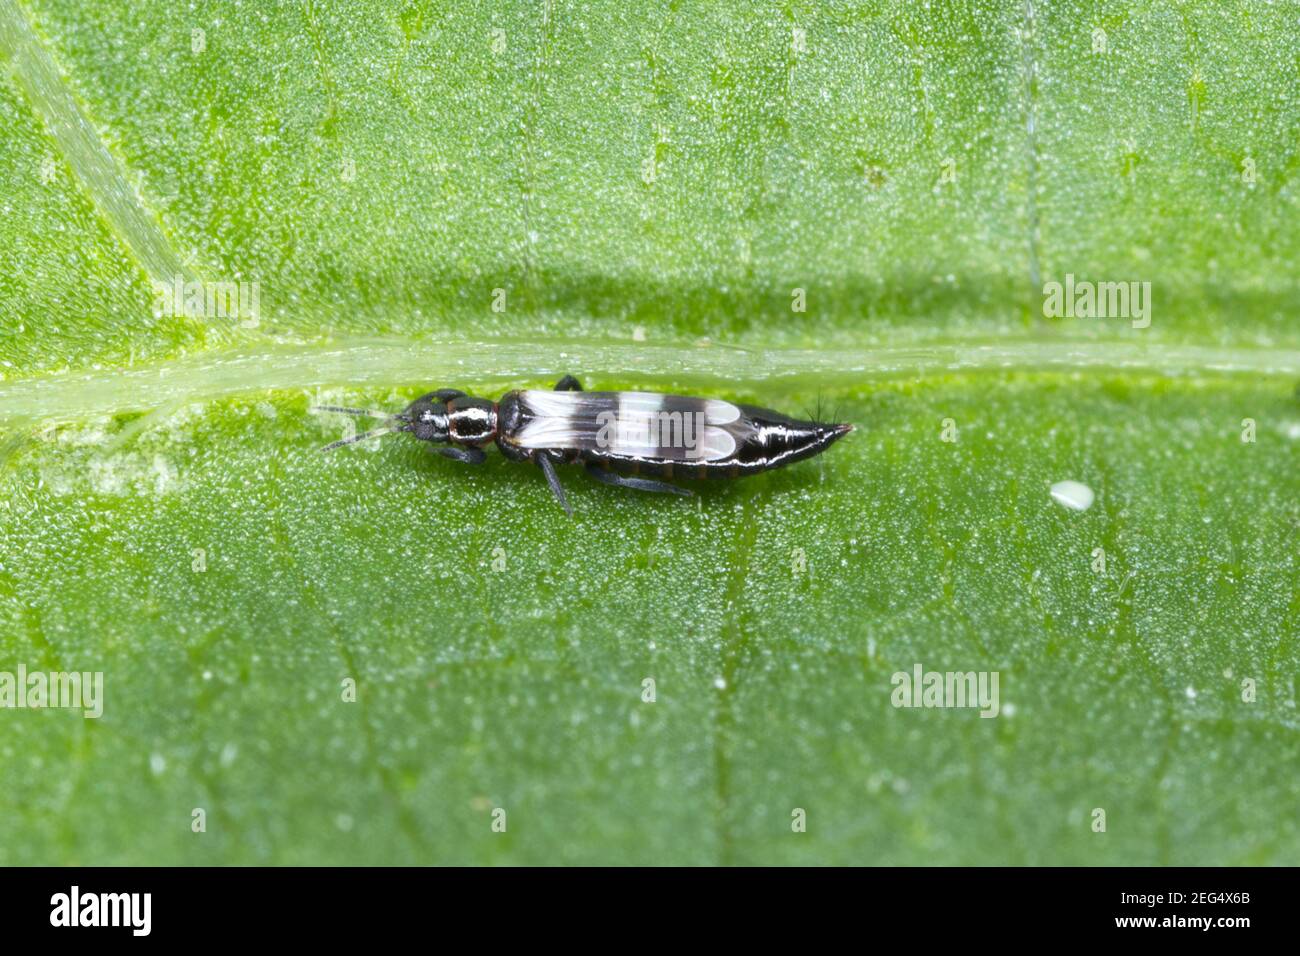 Thrips Thysanoptera (Aeolothrips: Aeolothripidae). Its predatory insect hunting for other, for example plant pests. Stock Photo